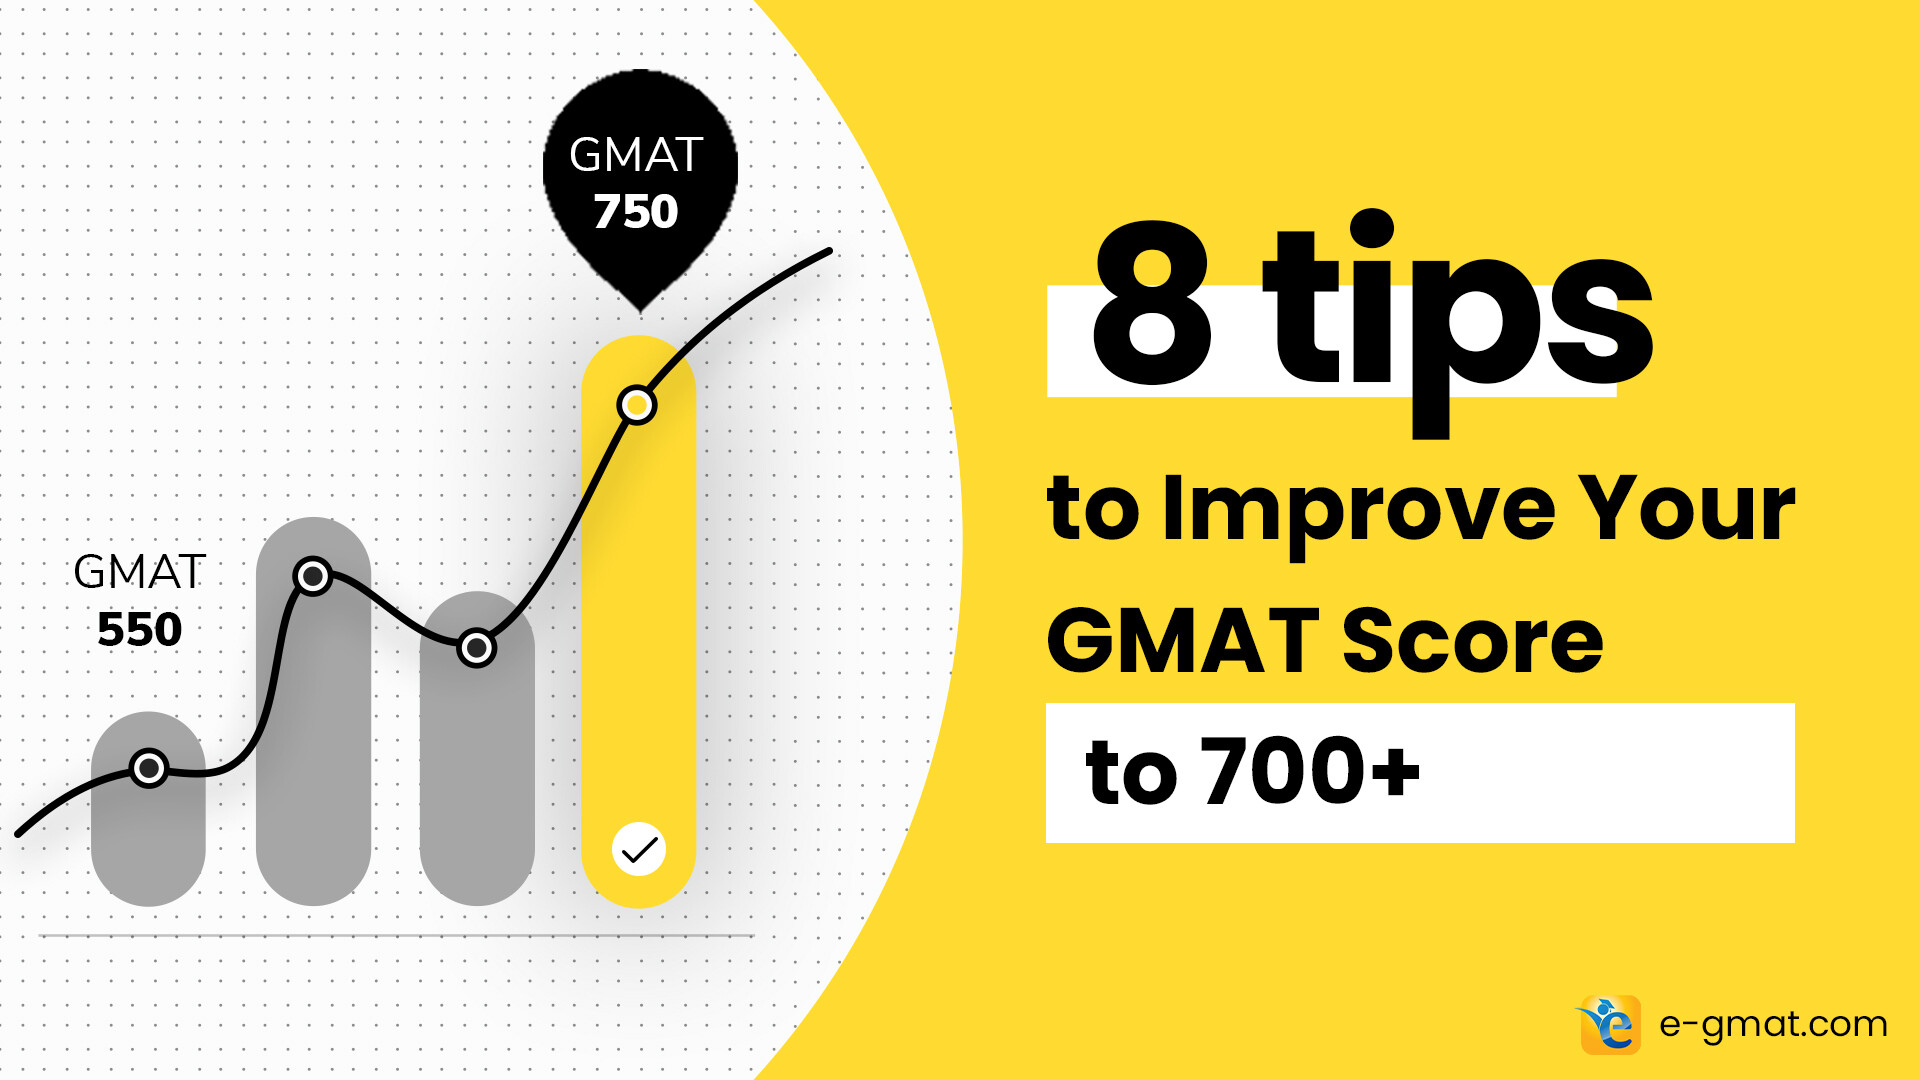 OfficialGMAT on X: Accepted by over 2,400 business schools and